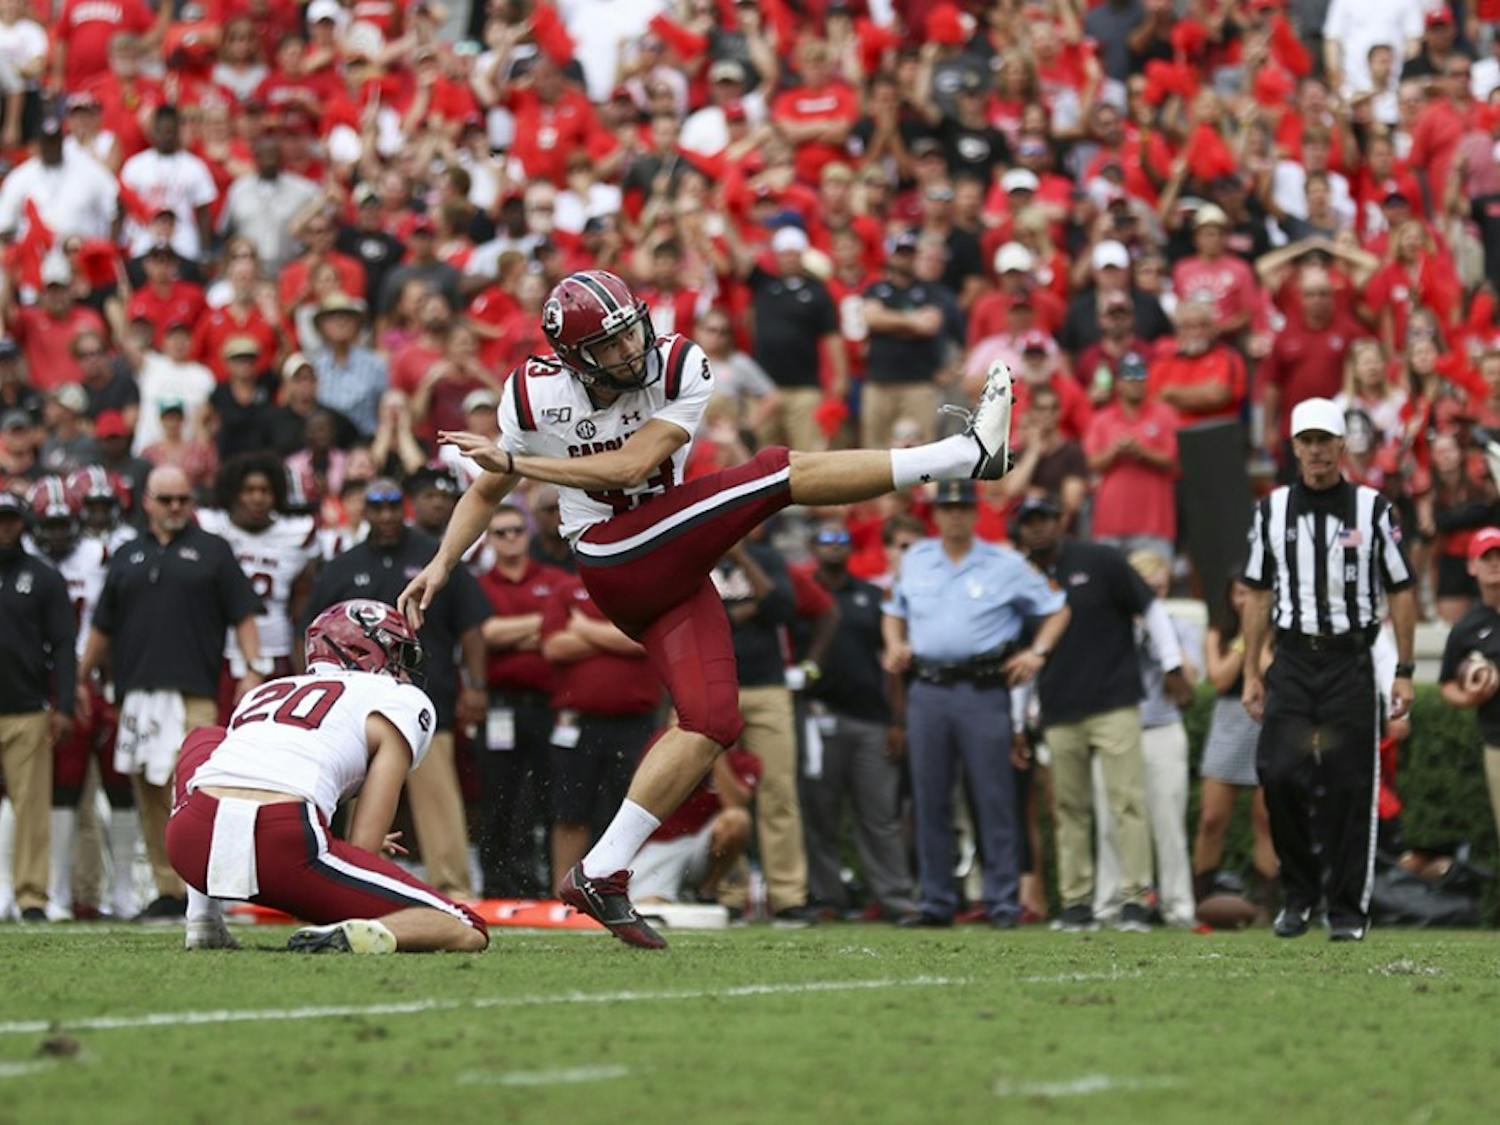 Junior place-kicker Parker White kicks a field goal in the game against UGA.